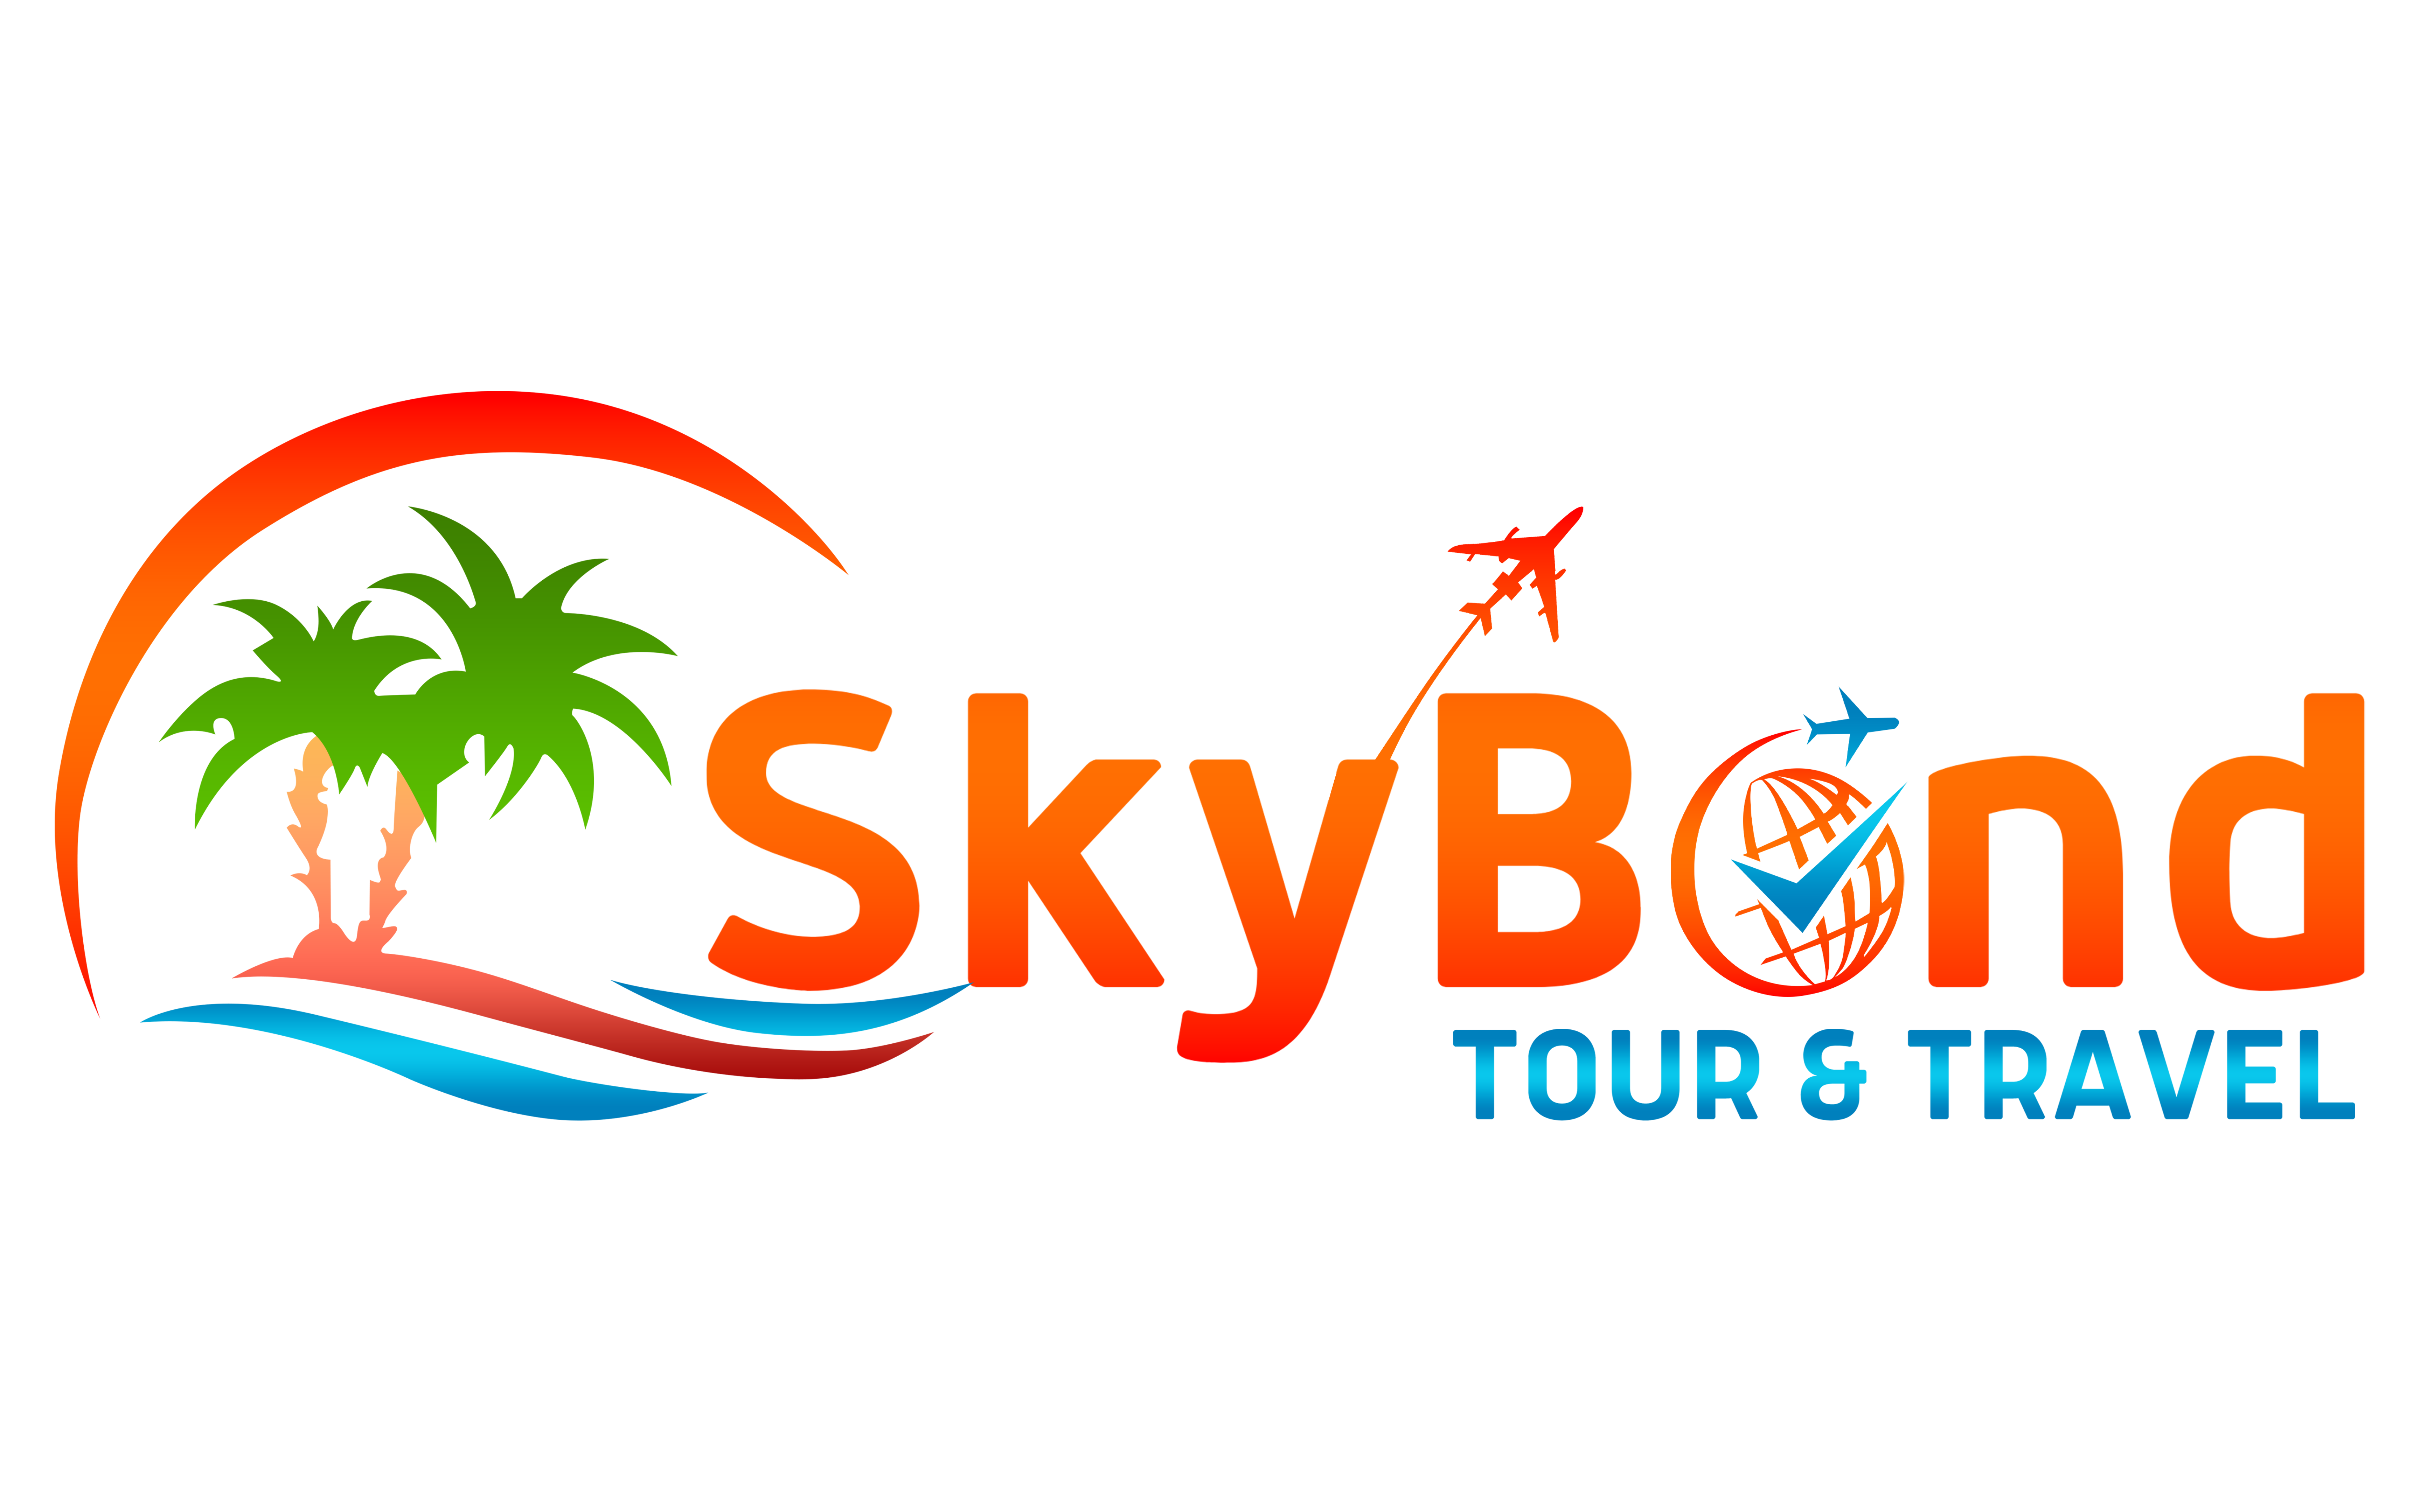 7 sky tour and travels